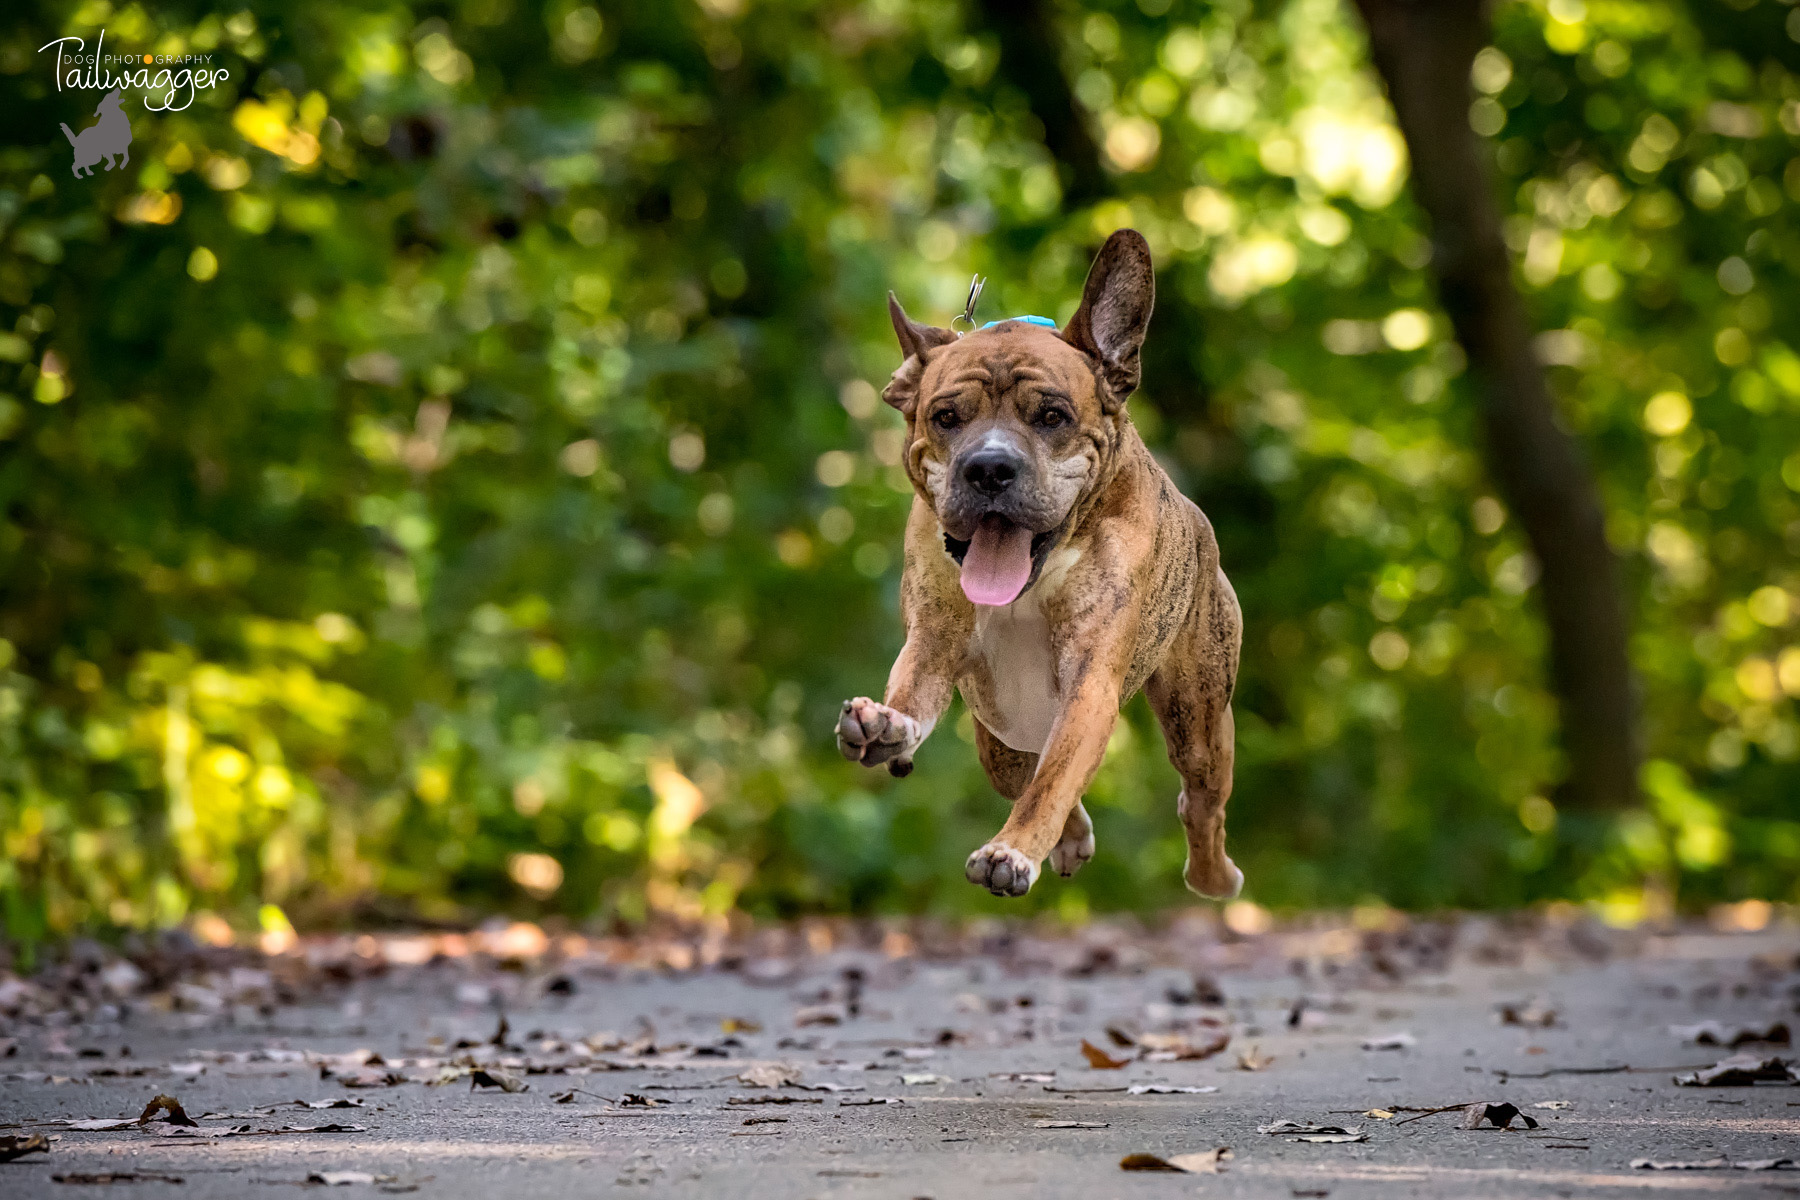 A Shar Pei, Boxer, Lab and Beagle mix catches some air running down a path.